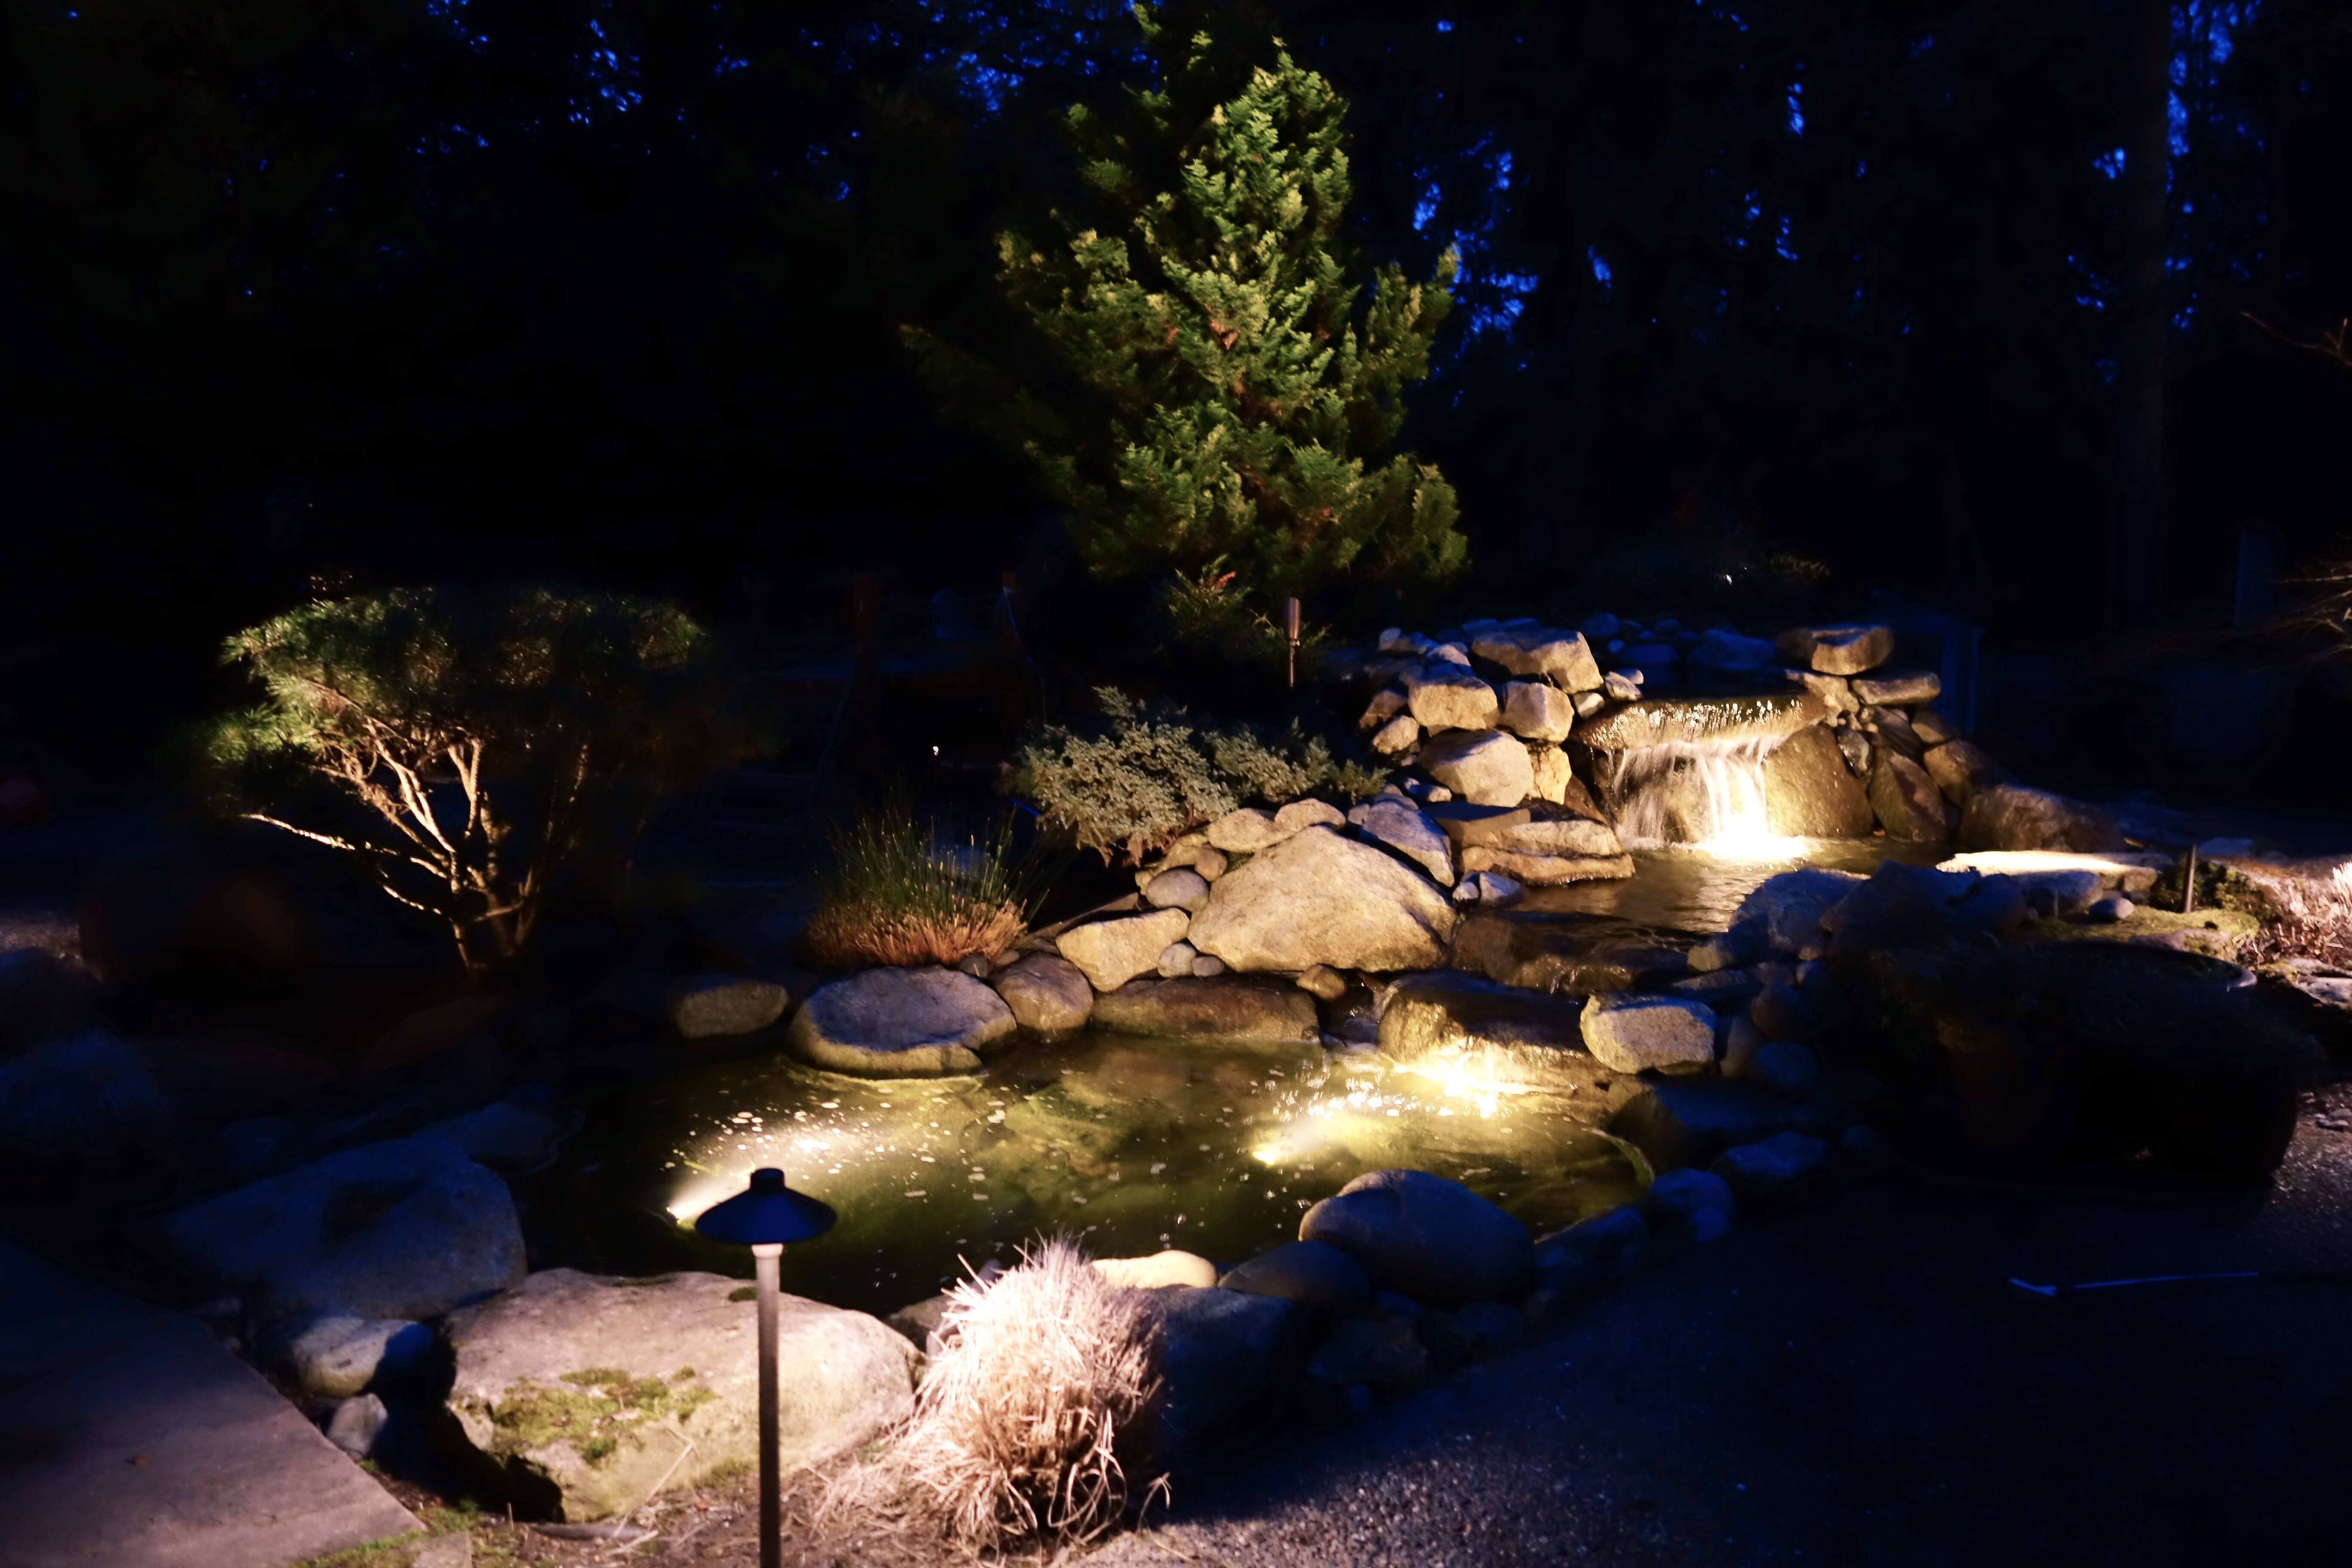 Rock and water feature lit at night